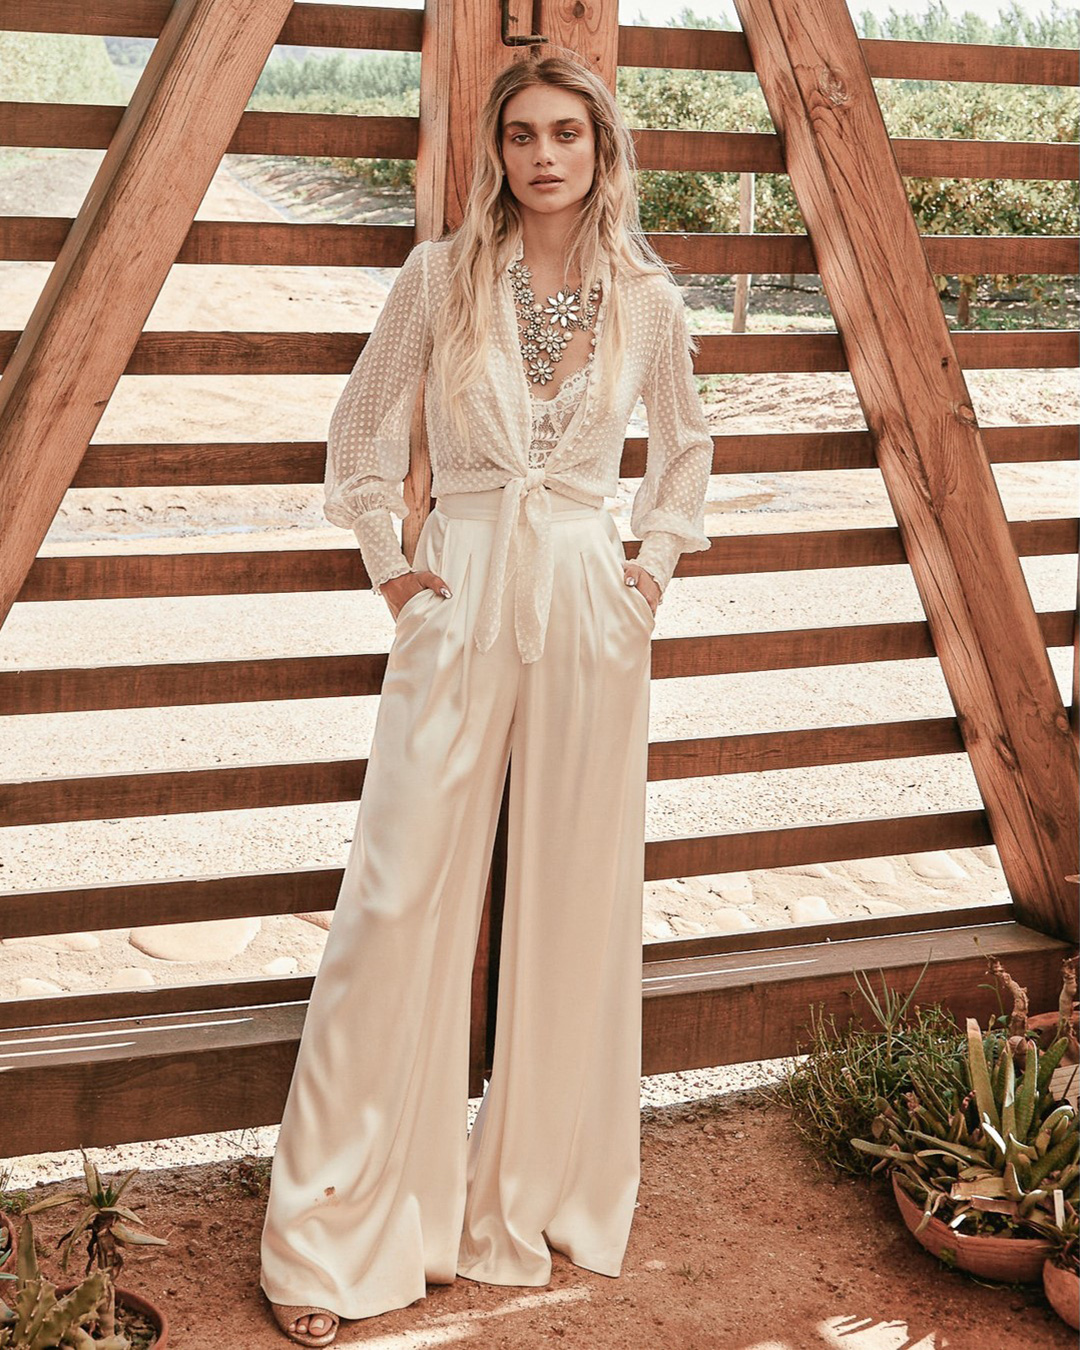 wedding pantsuit ideas simple with cape catherine__deane